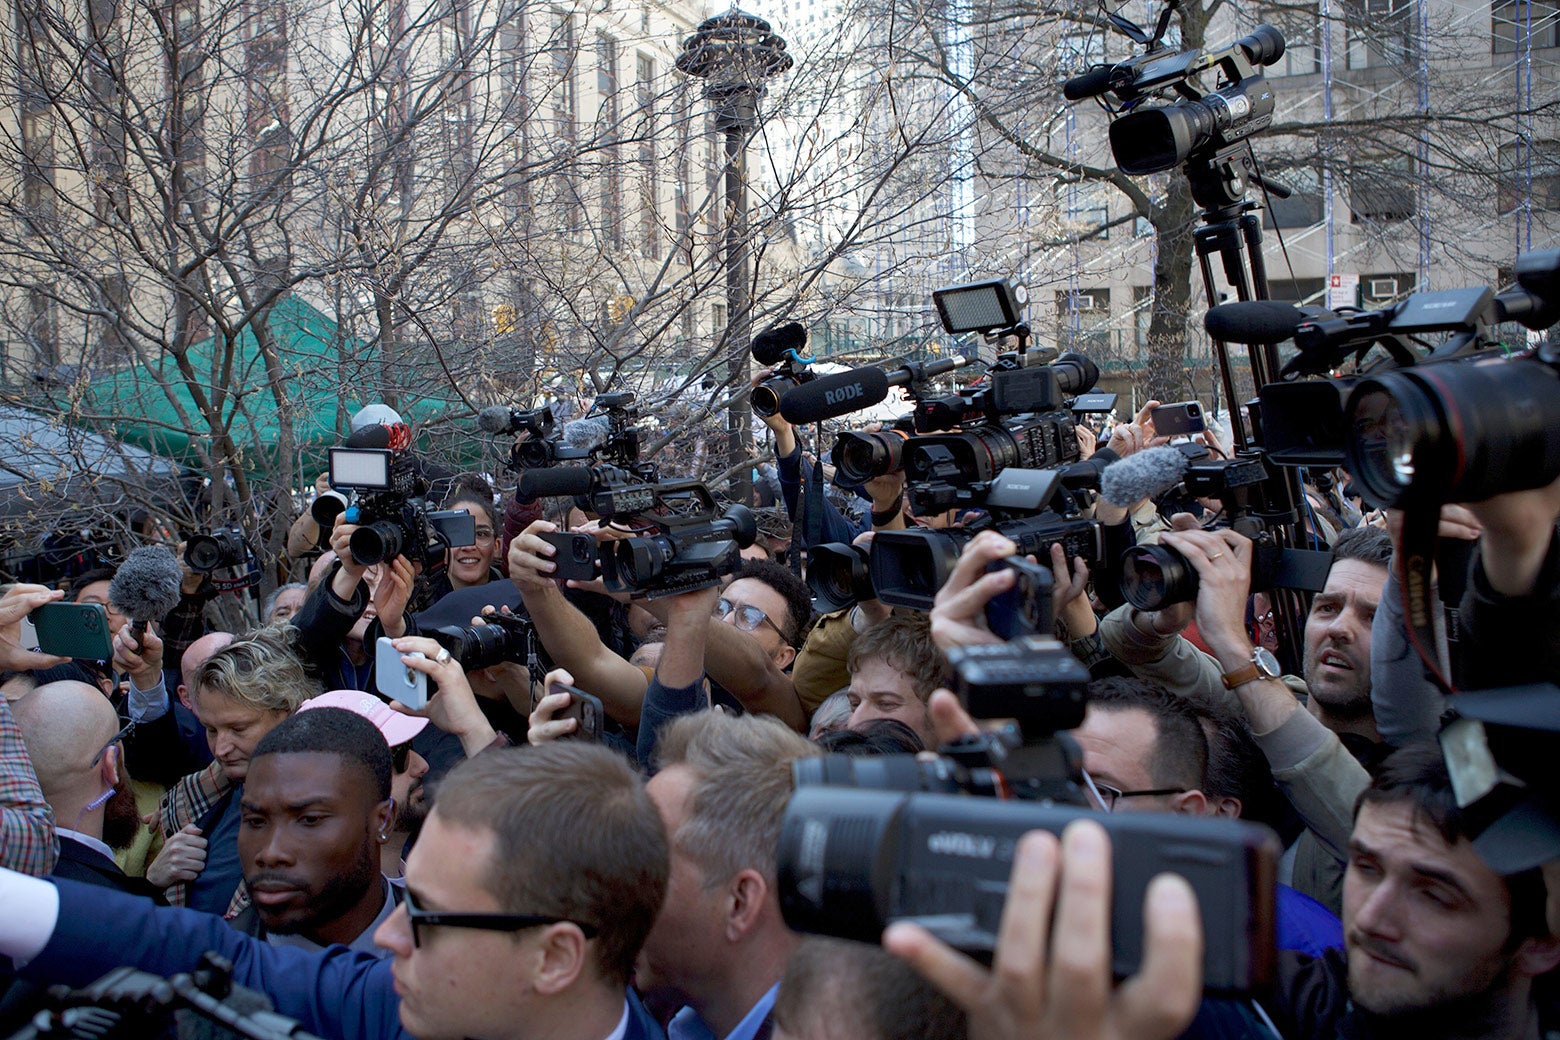 A busy scrum of reporters with cameras outside of a courthouse.